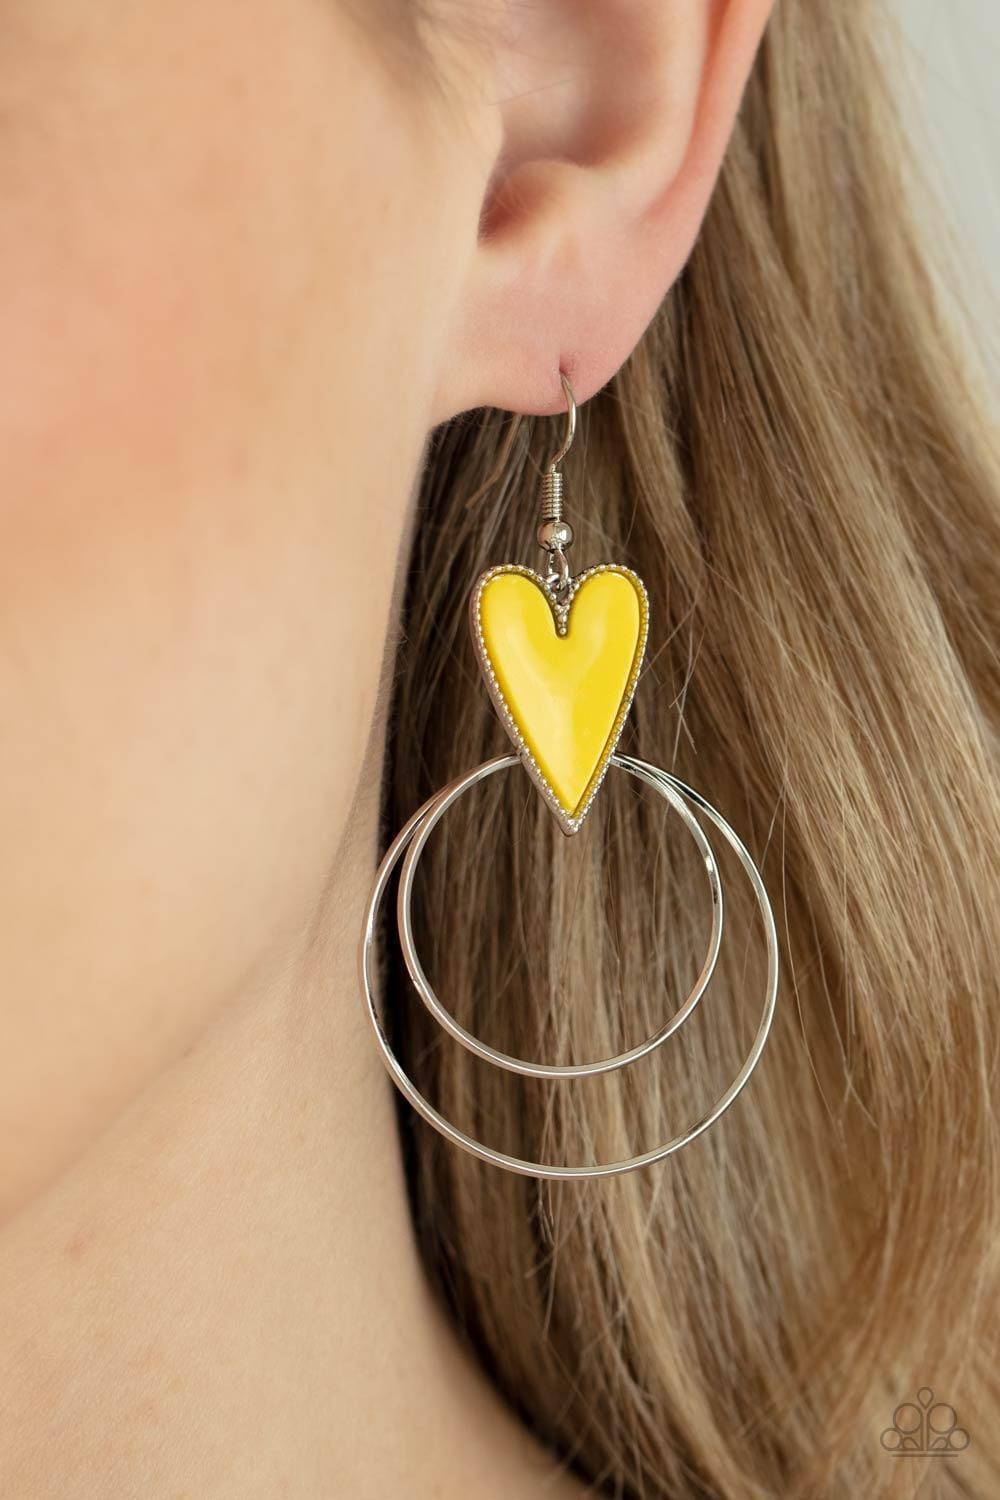 Paparazzi Accessories - Happily Ever Hearts - Yellow Earring - Bling by JessieK